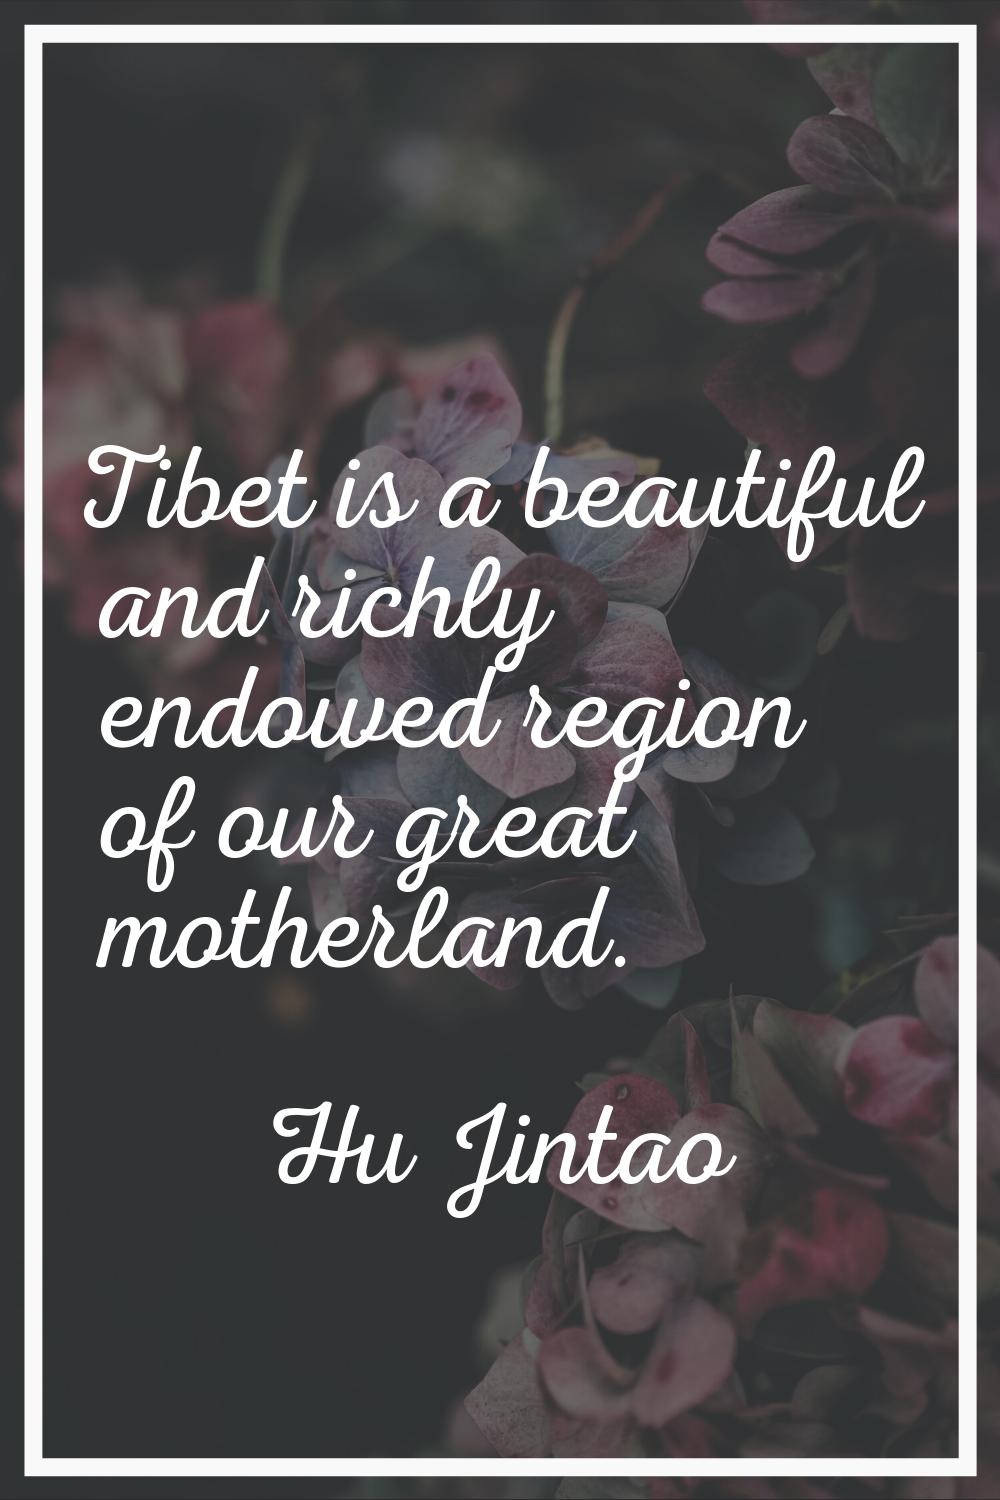 Tibet is a beautiful and richly endowed region of our great motherland.